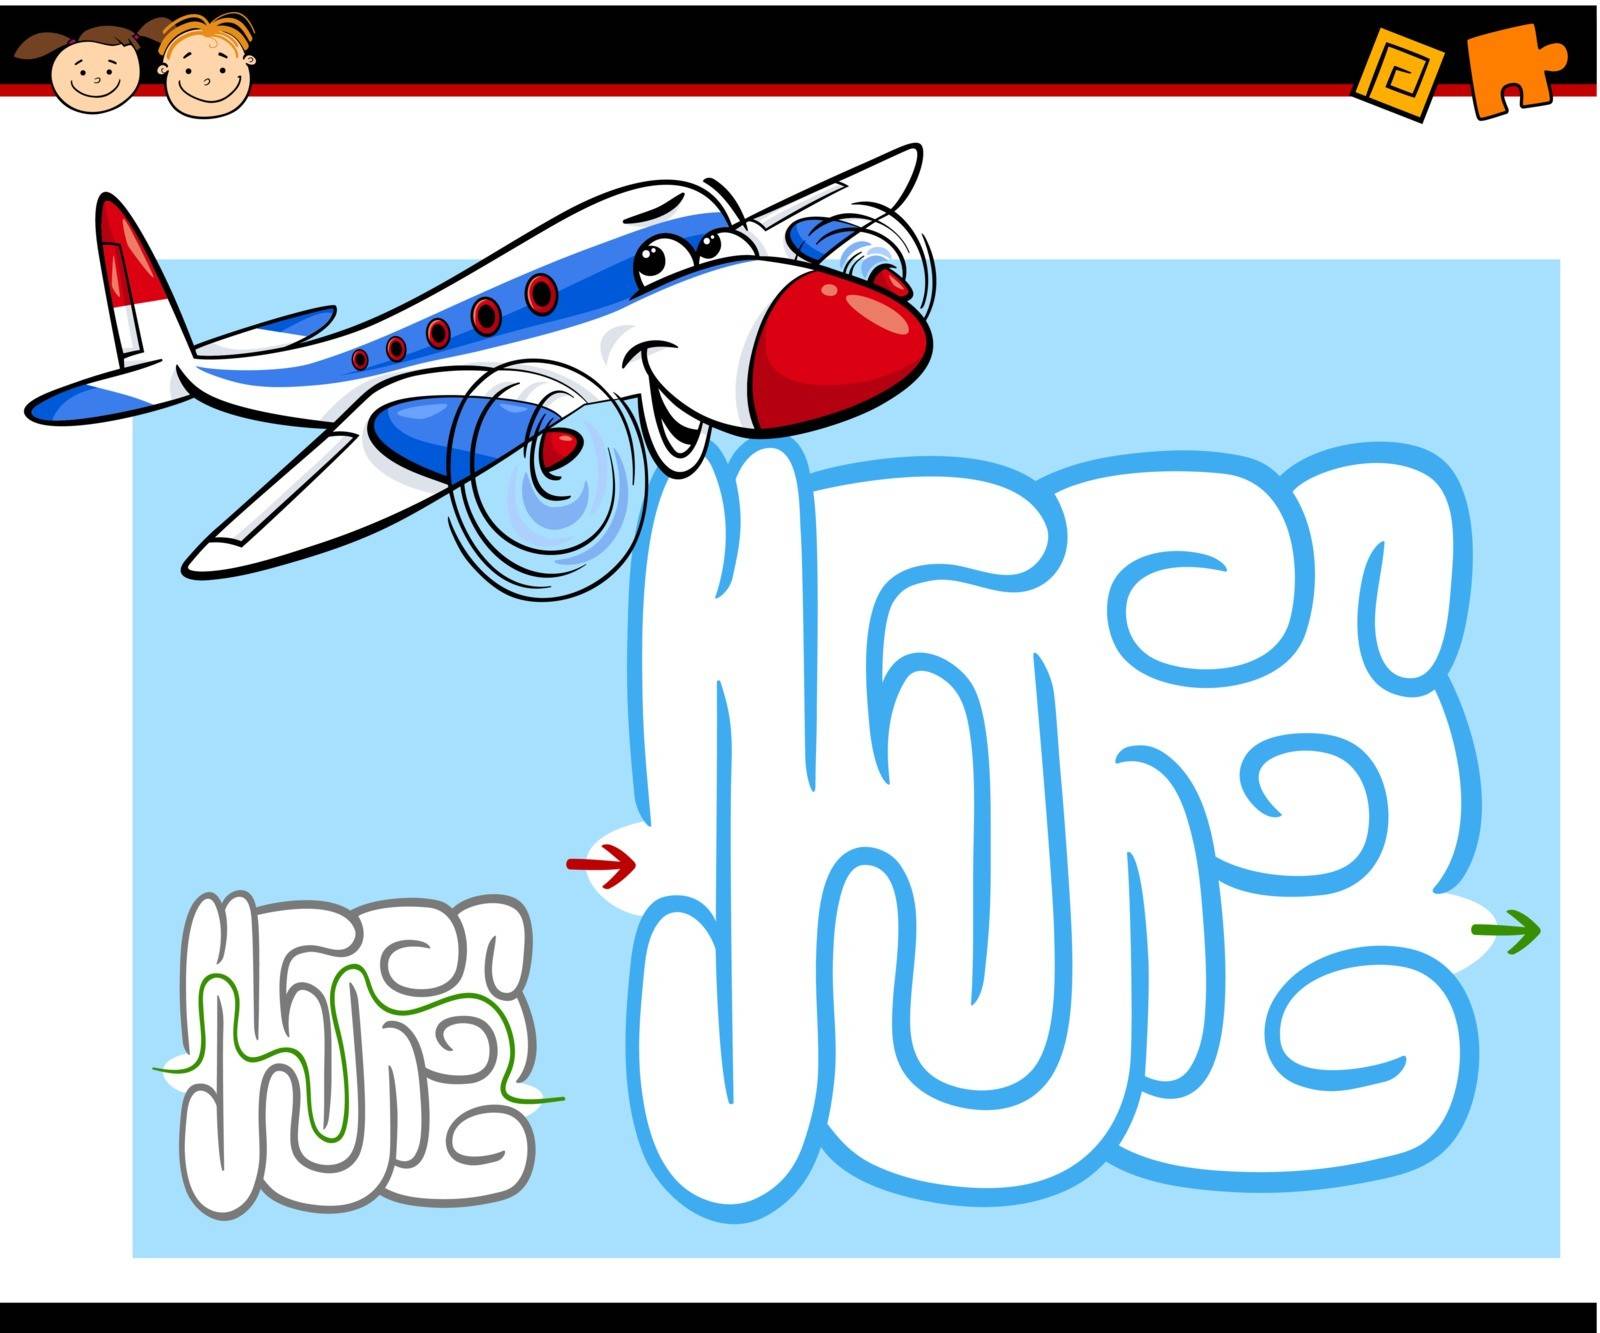 Cartoon Illustration of Education Maze or Labyrinth Game for Preschool Children with Funny Airplane